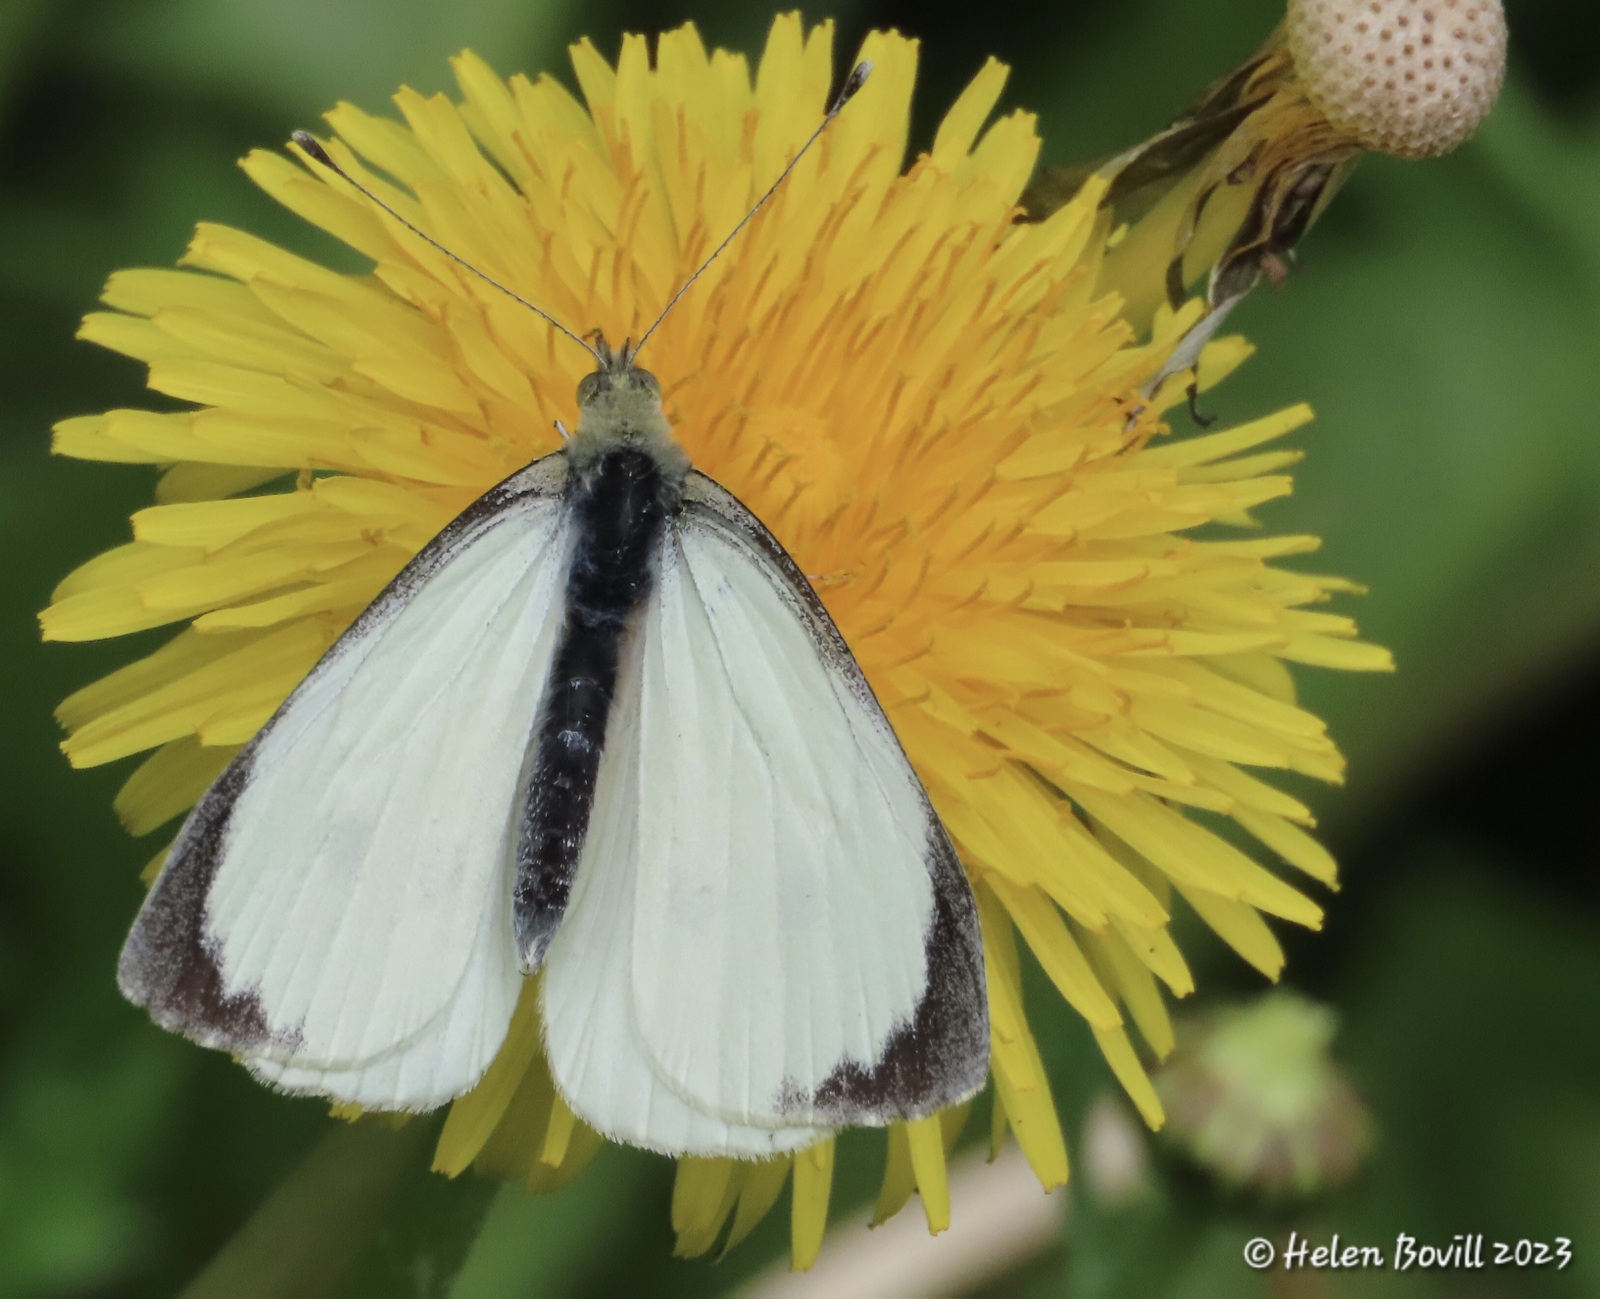 A male Large White butterfly on a Dandelion